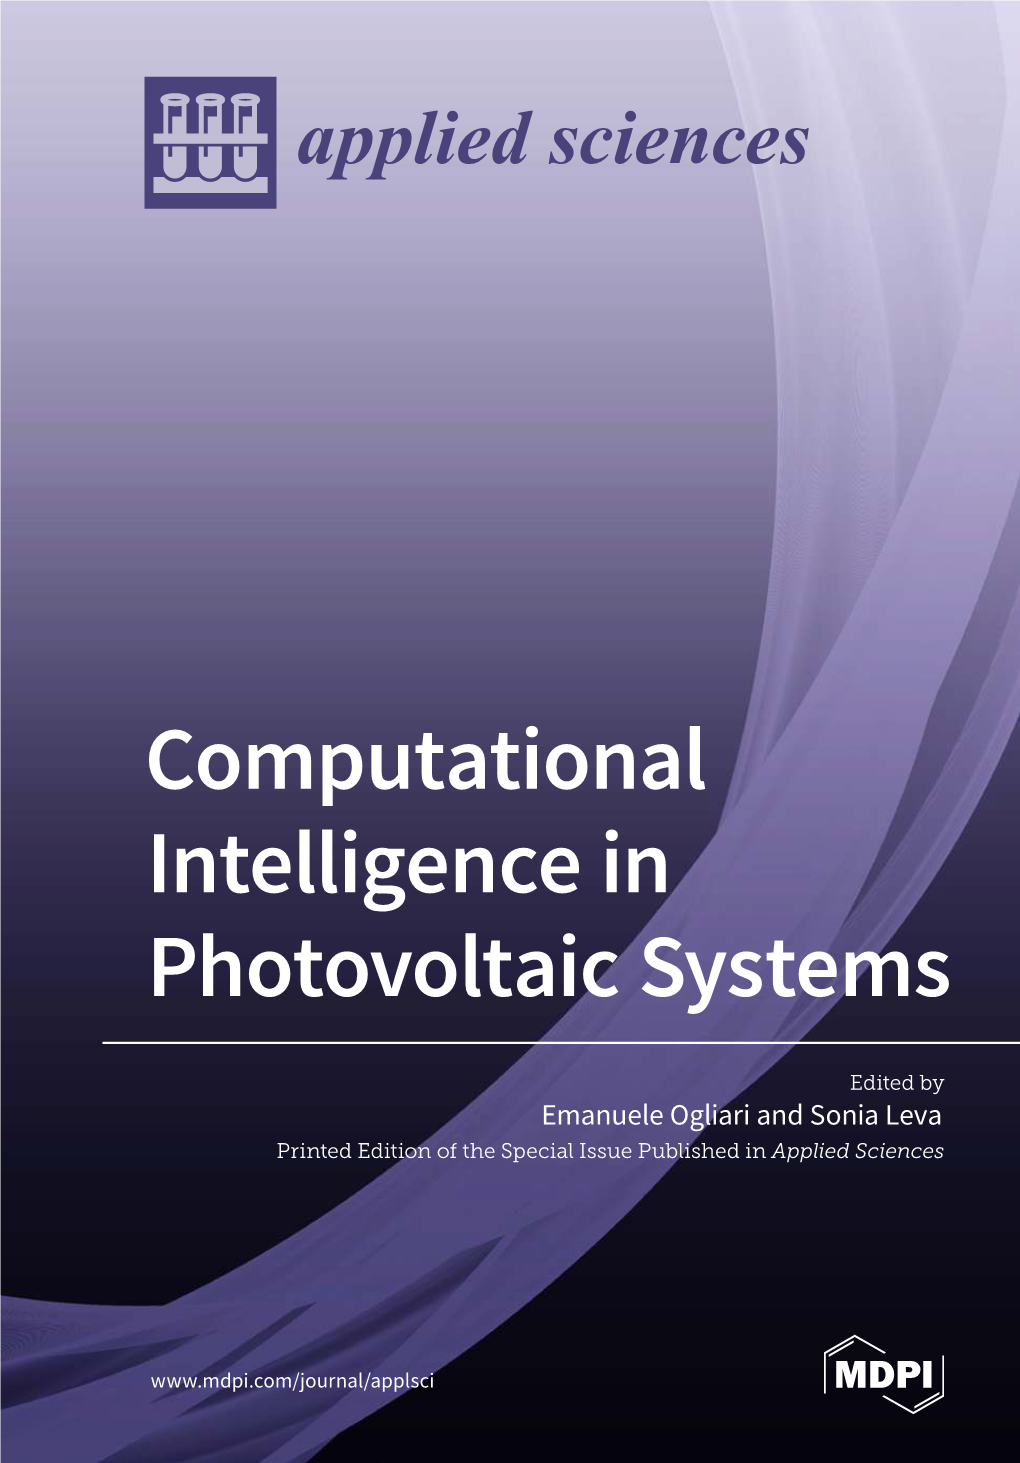 Computational Intelligence in Photovoltaic Systems